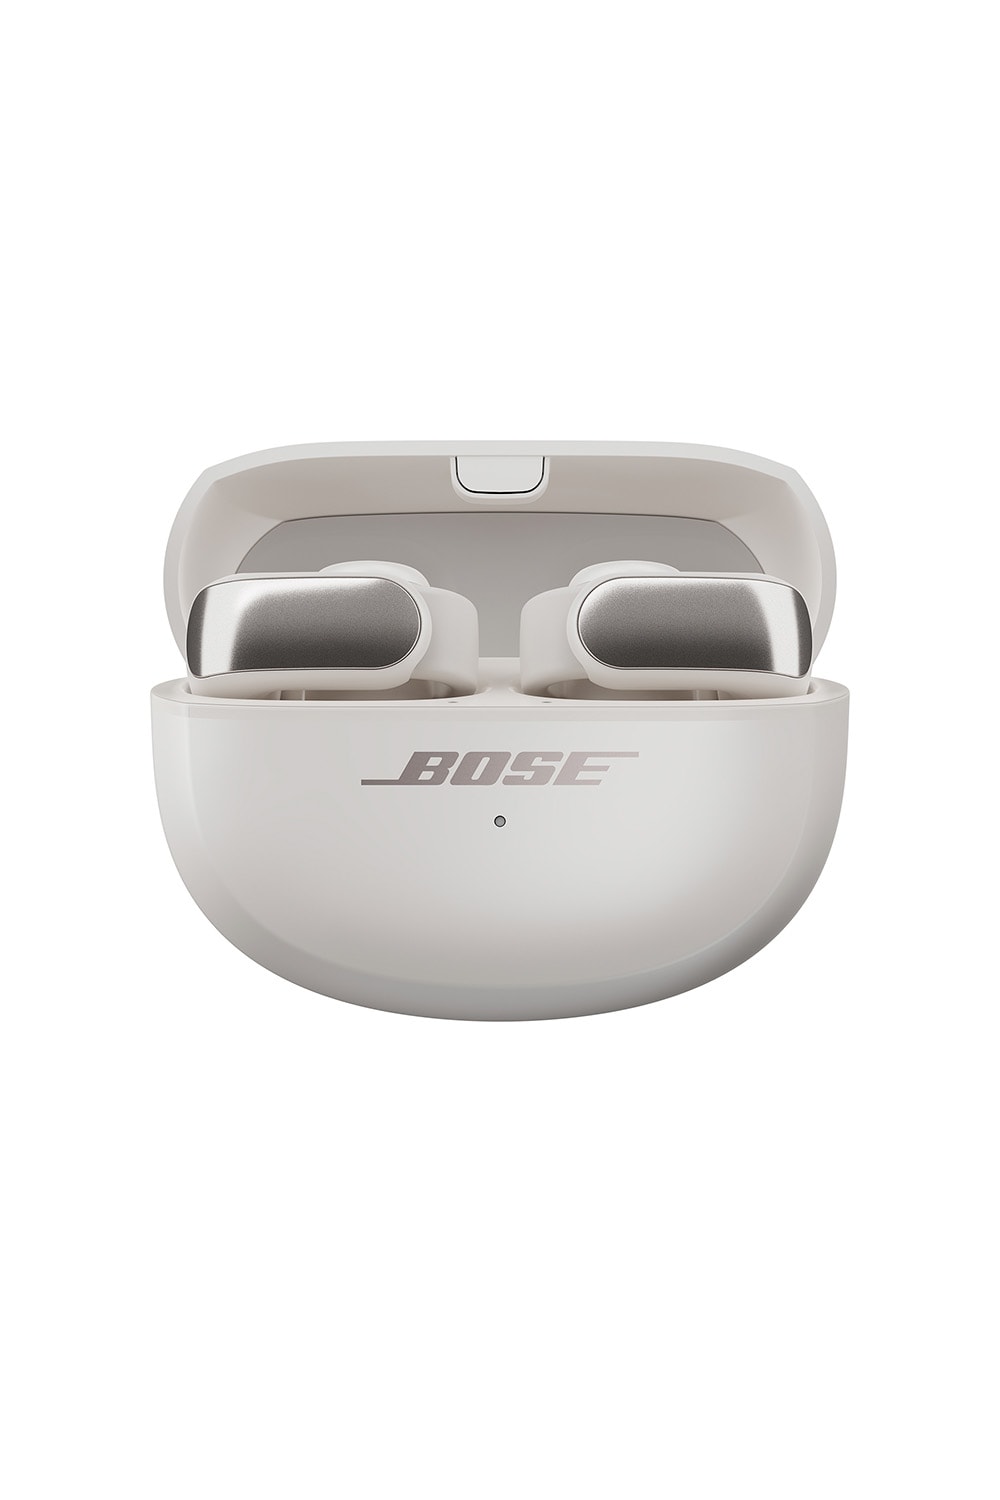 Bose's New Ultra Open Earbuds Are Unlike Anything Else We've Tried And They're Available Now